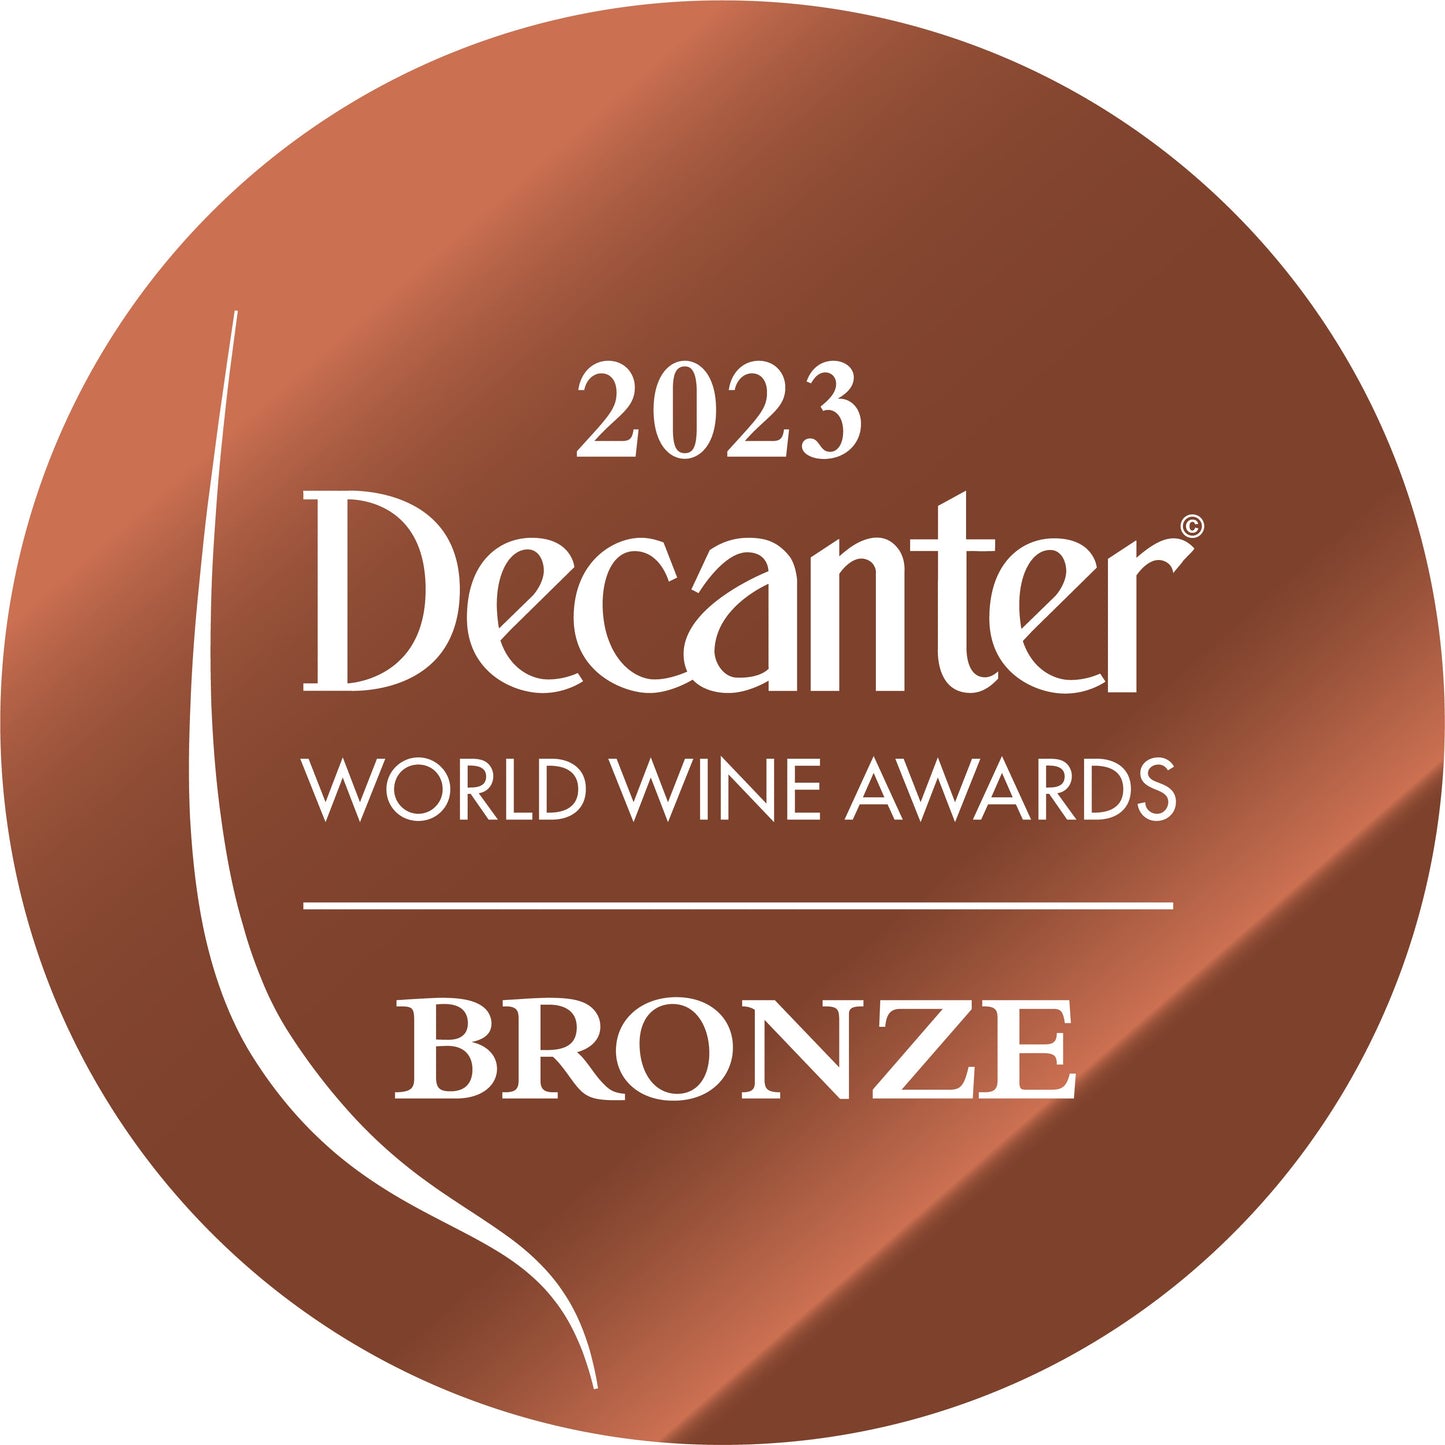 DWWA 2023 Bronze GENERIC - Copyright of the medal artwork for 1000 labels